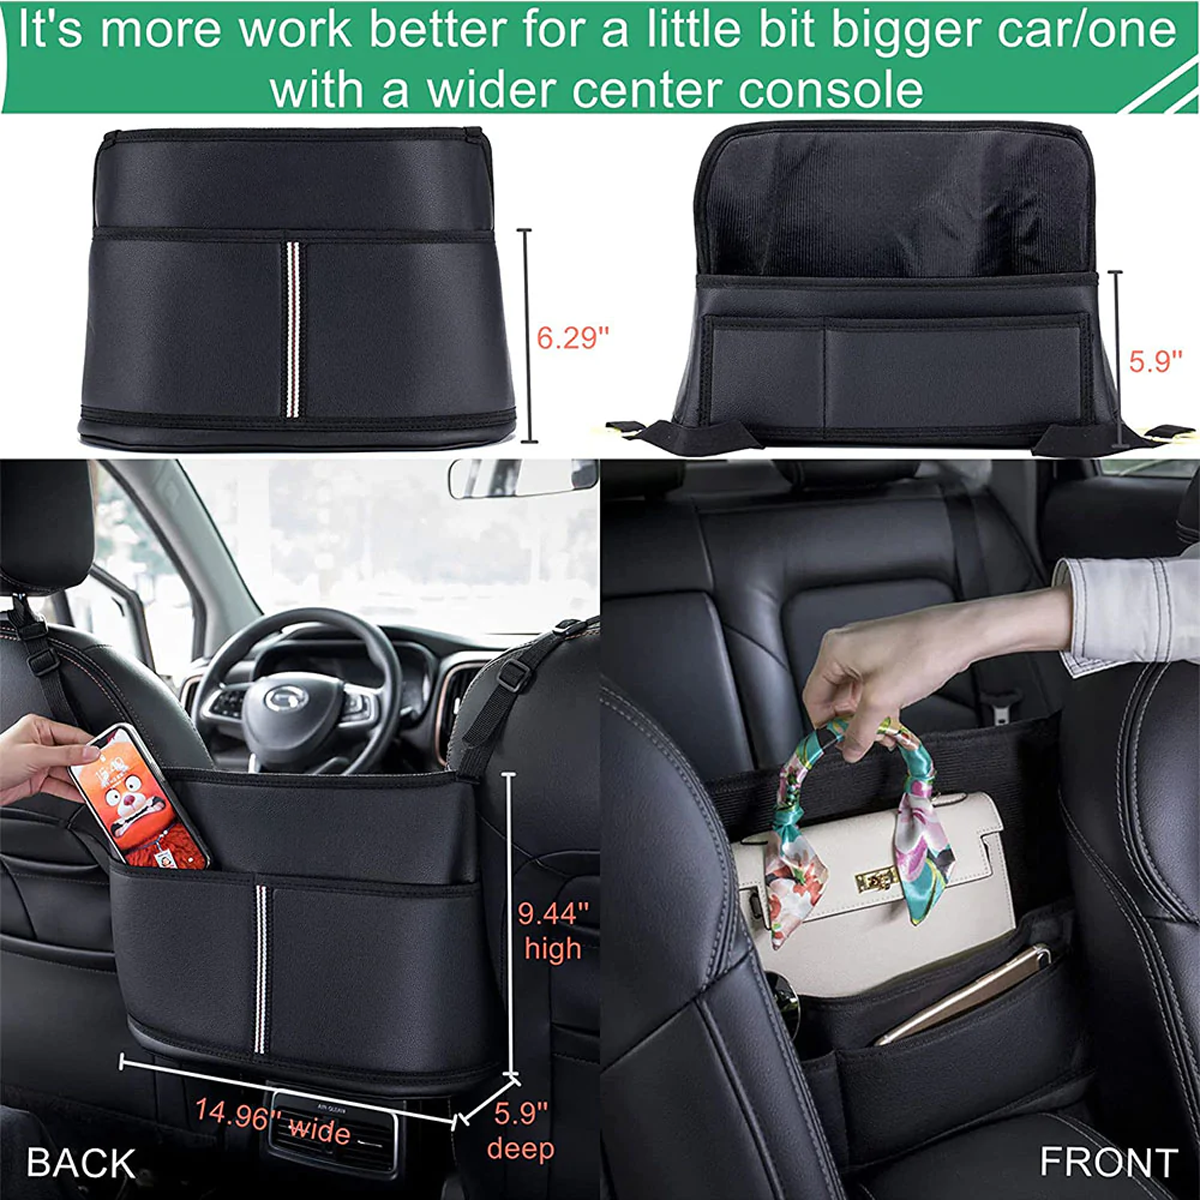 Custom Text For Car Purse Holder for Car Handbag Holder Between Seats Premium PU Leather, Compatible with All Cars, Auto Driver Or Passenger Accessories Organizer, Hanging Car Purse Storage Pocket Back Seat Pet Barrier DE11991